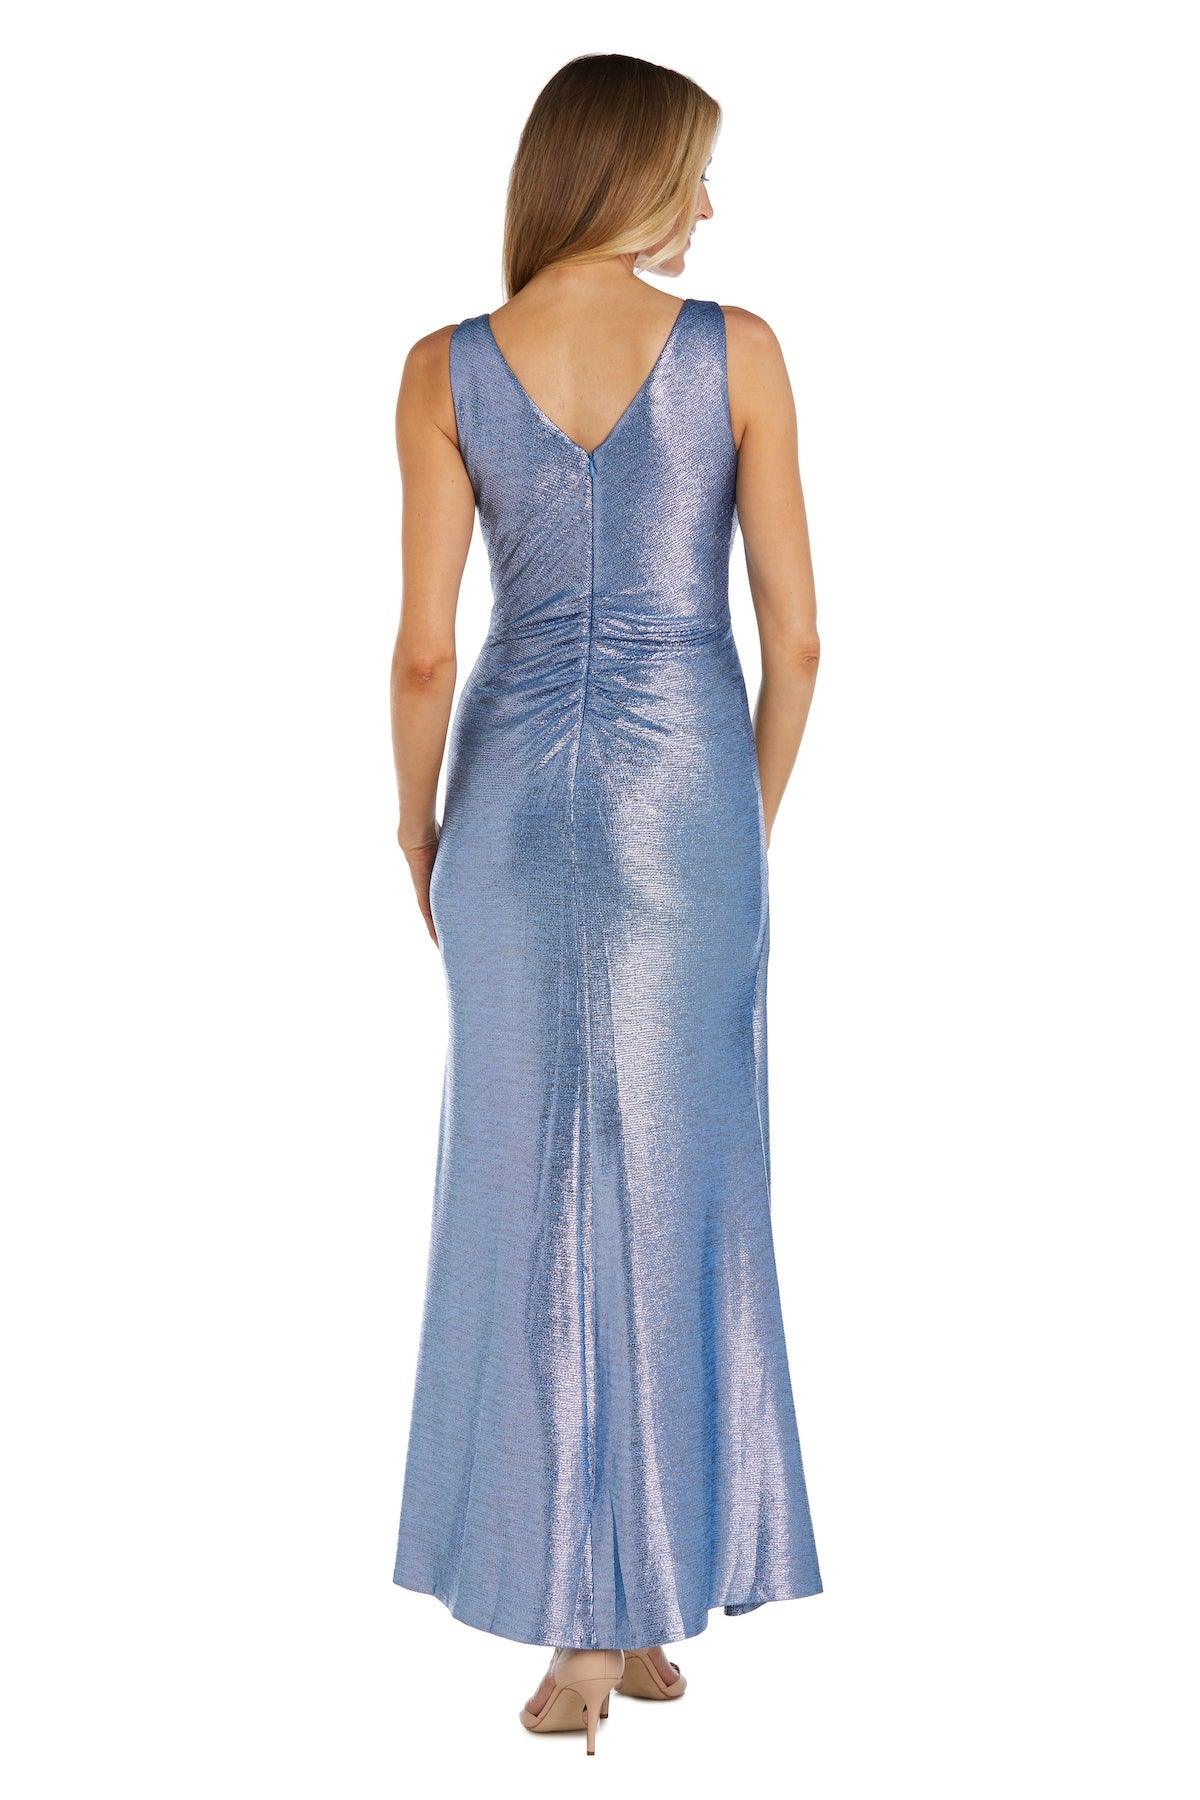 Nightway Long Formal Evening Dress 22156 - The Dress Outlet